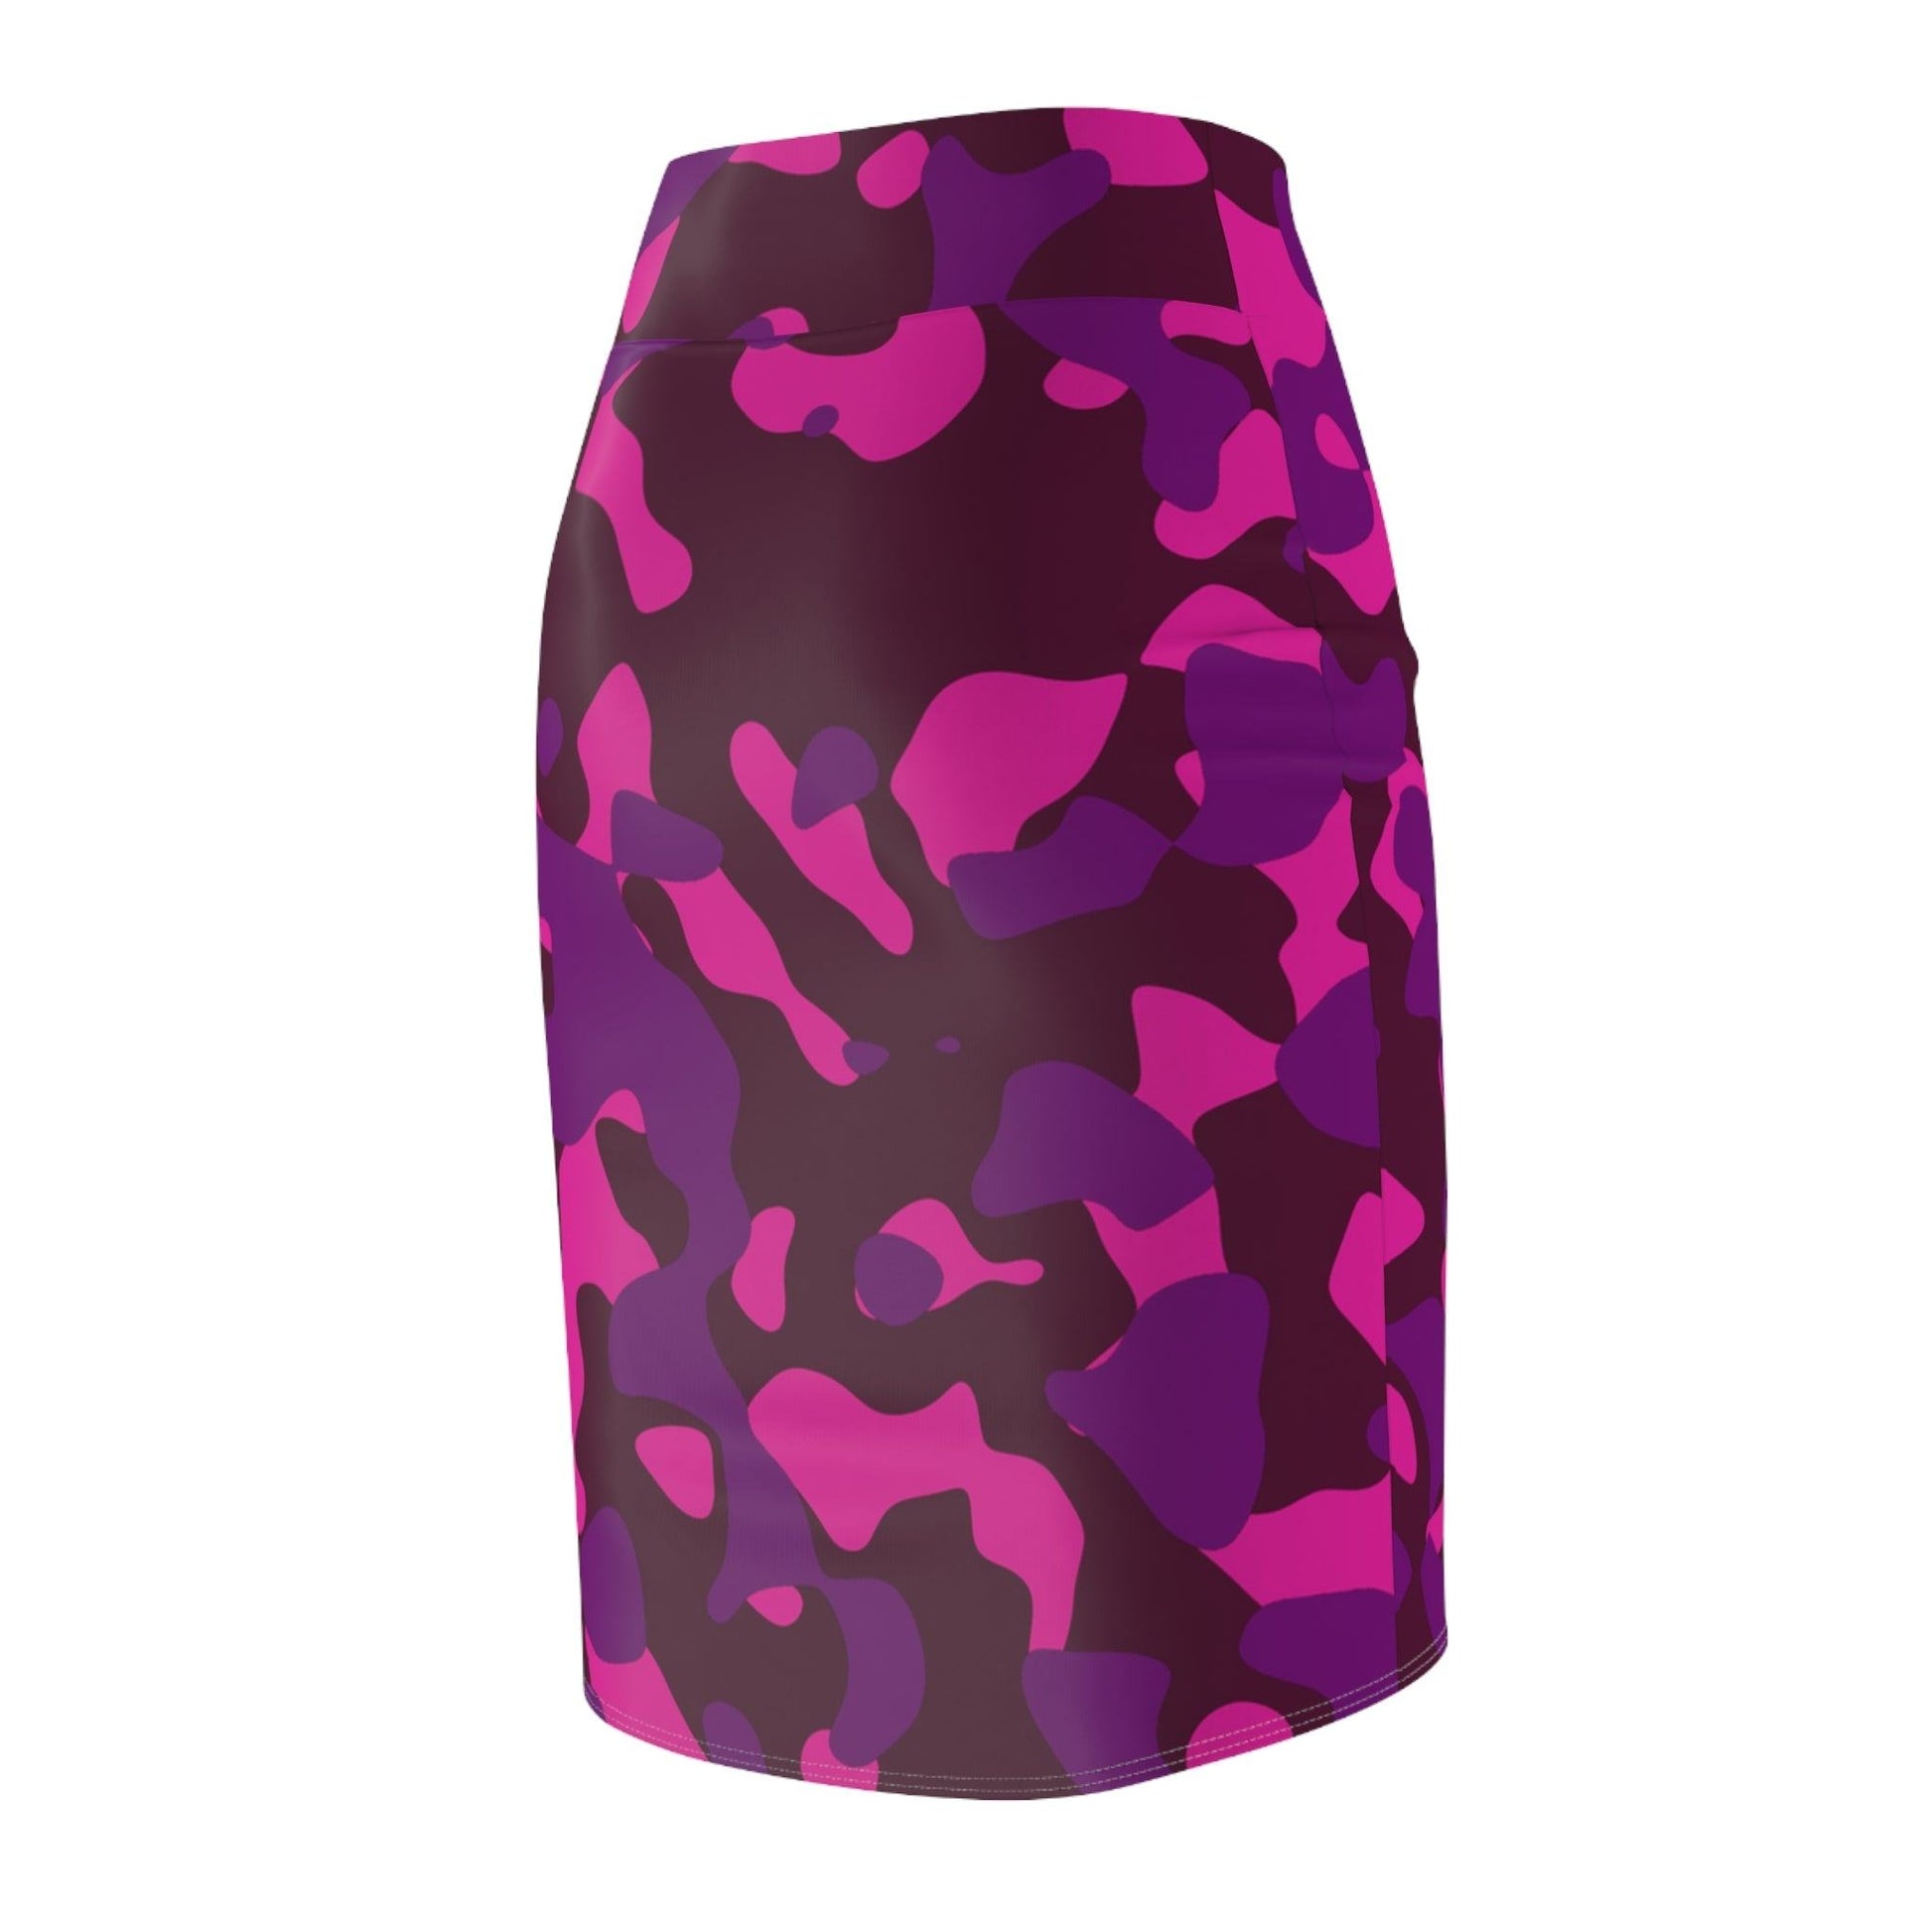 Pink Camouflage Bleistiftrock Bleistiftrock 74.99 All Over Print, AOP, AOP Clothing, Assembled in the USA, Assembled in USA, Bleistiftrock, Camouflage, Made in the USA, Made in USA, Pink, Skirts & Dresses, Sublimation, Women's Clothing JLR Design